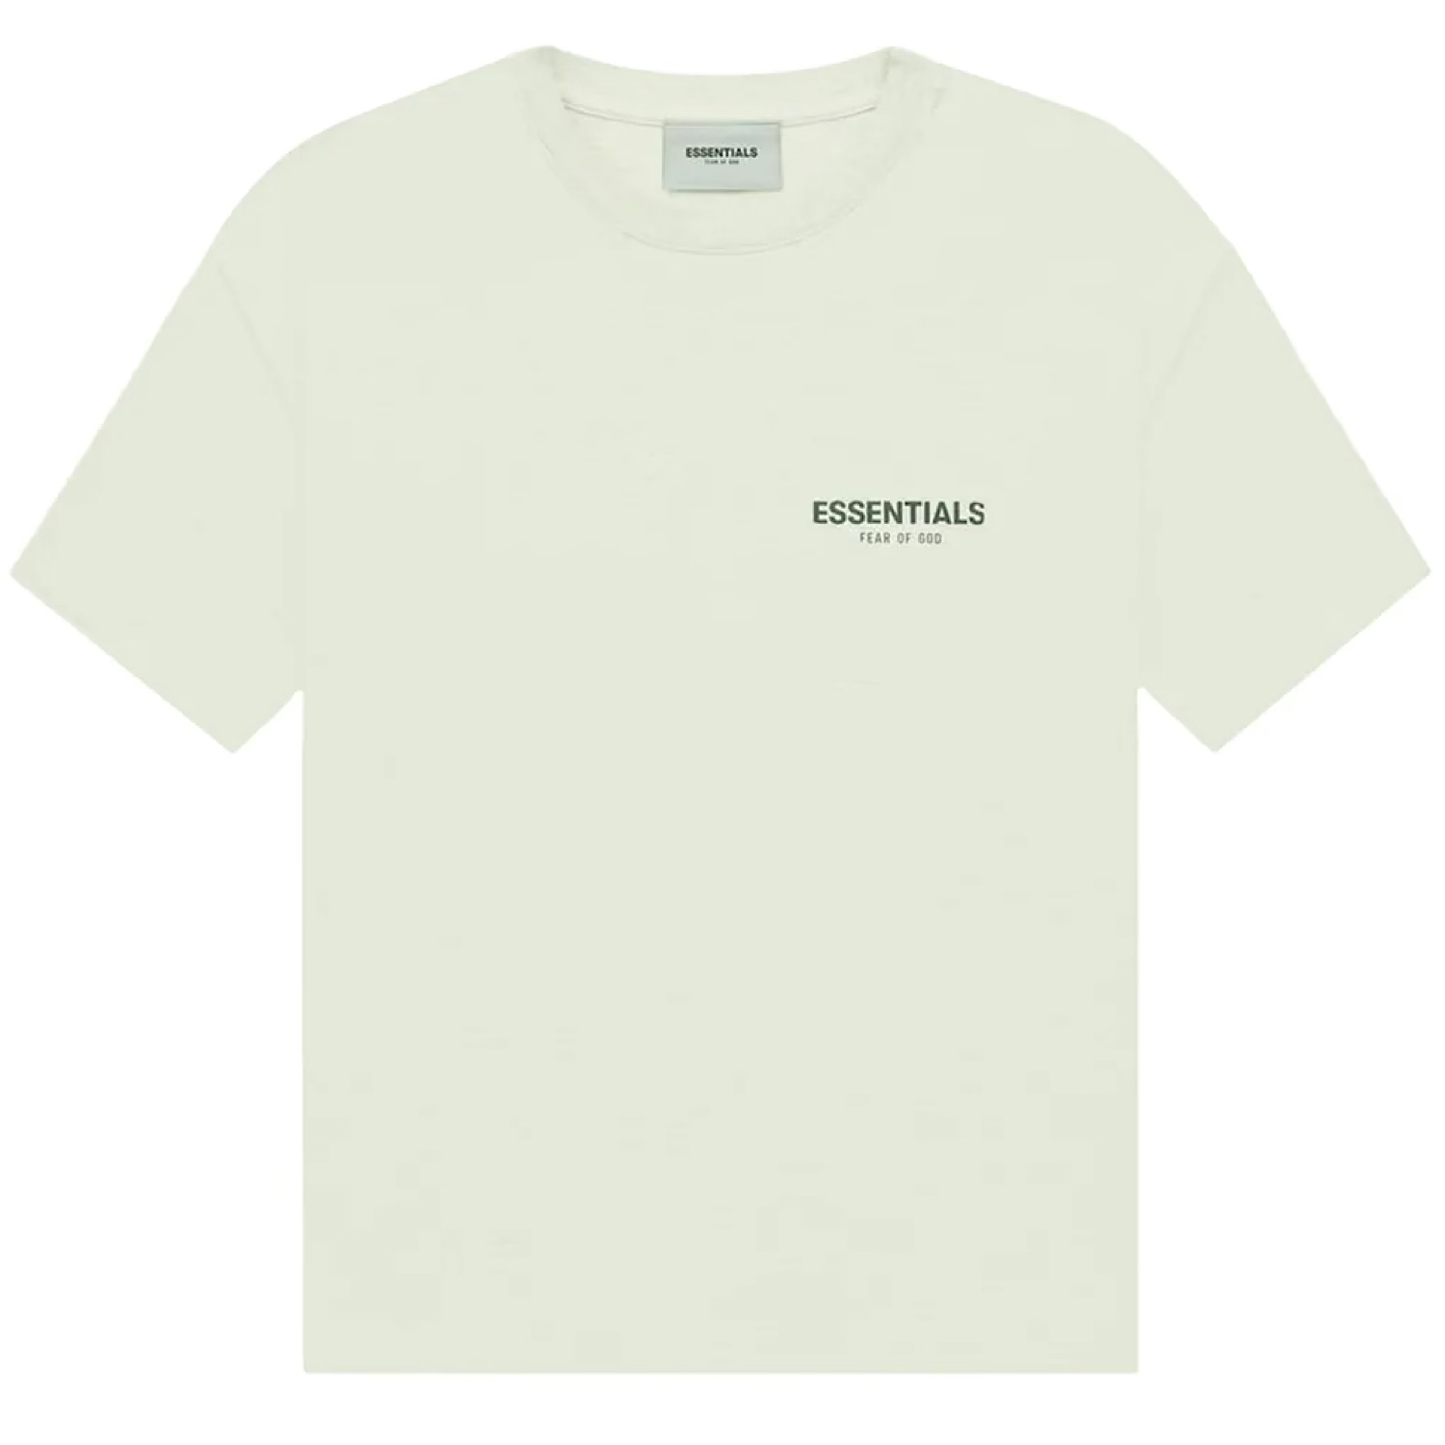 Fear of God: Essentials “Concrete” Tee